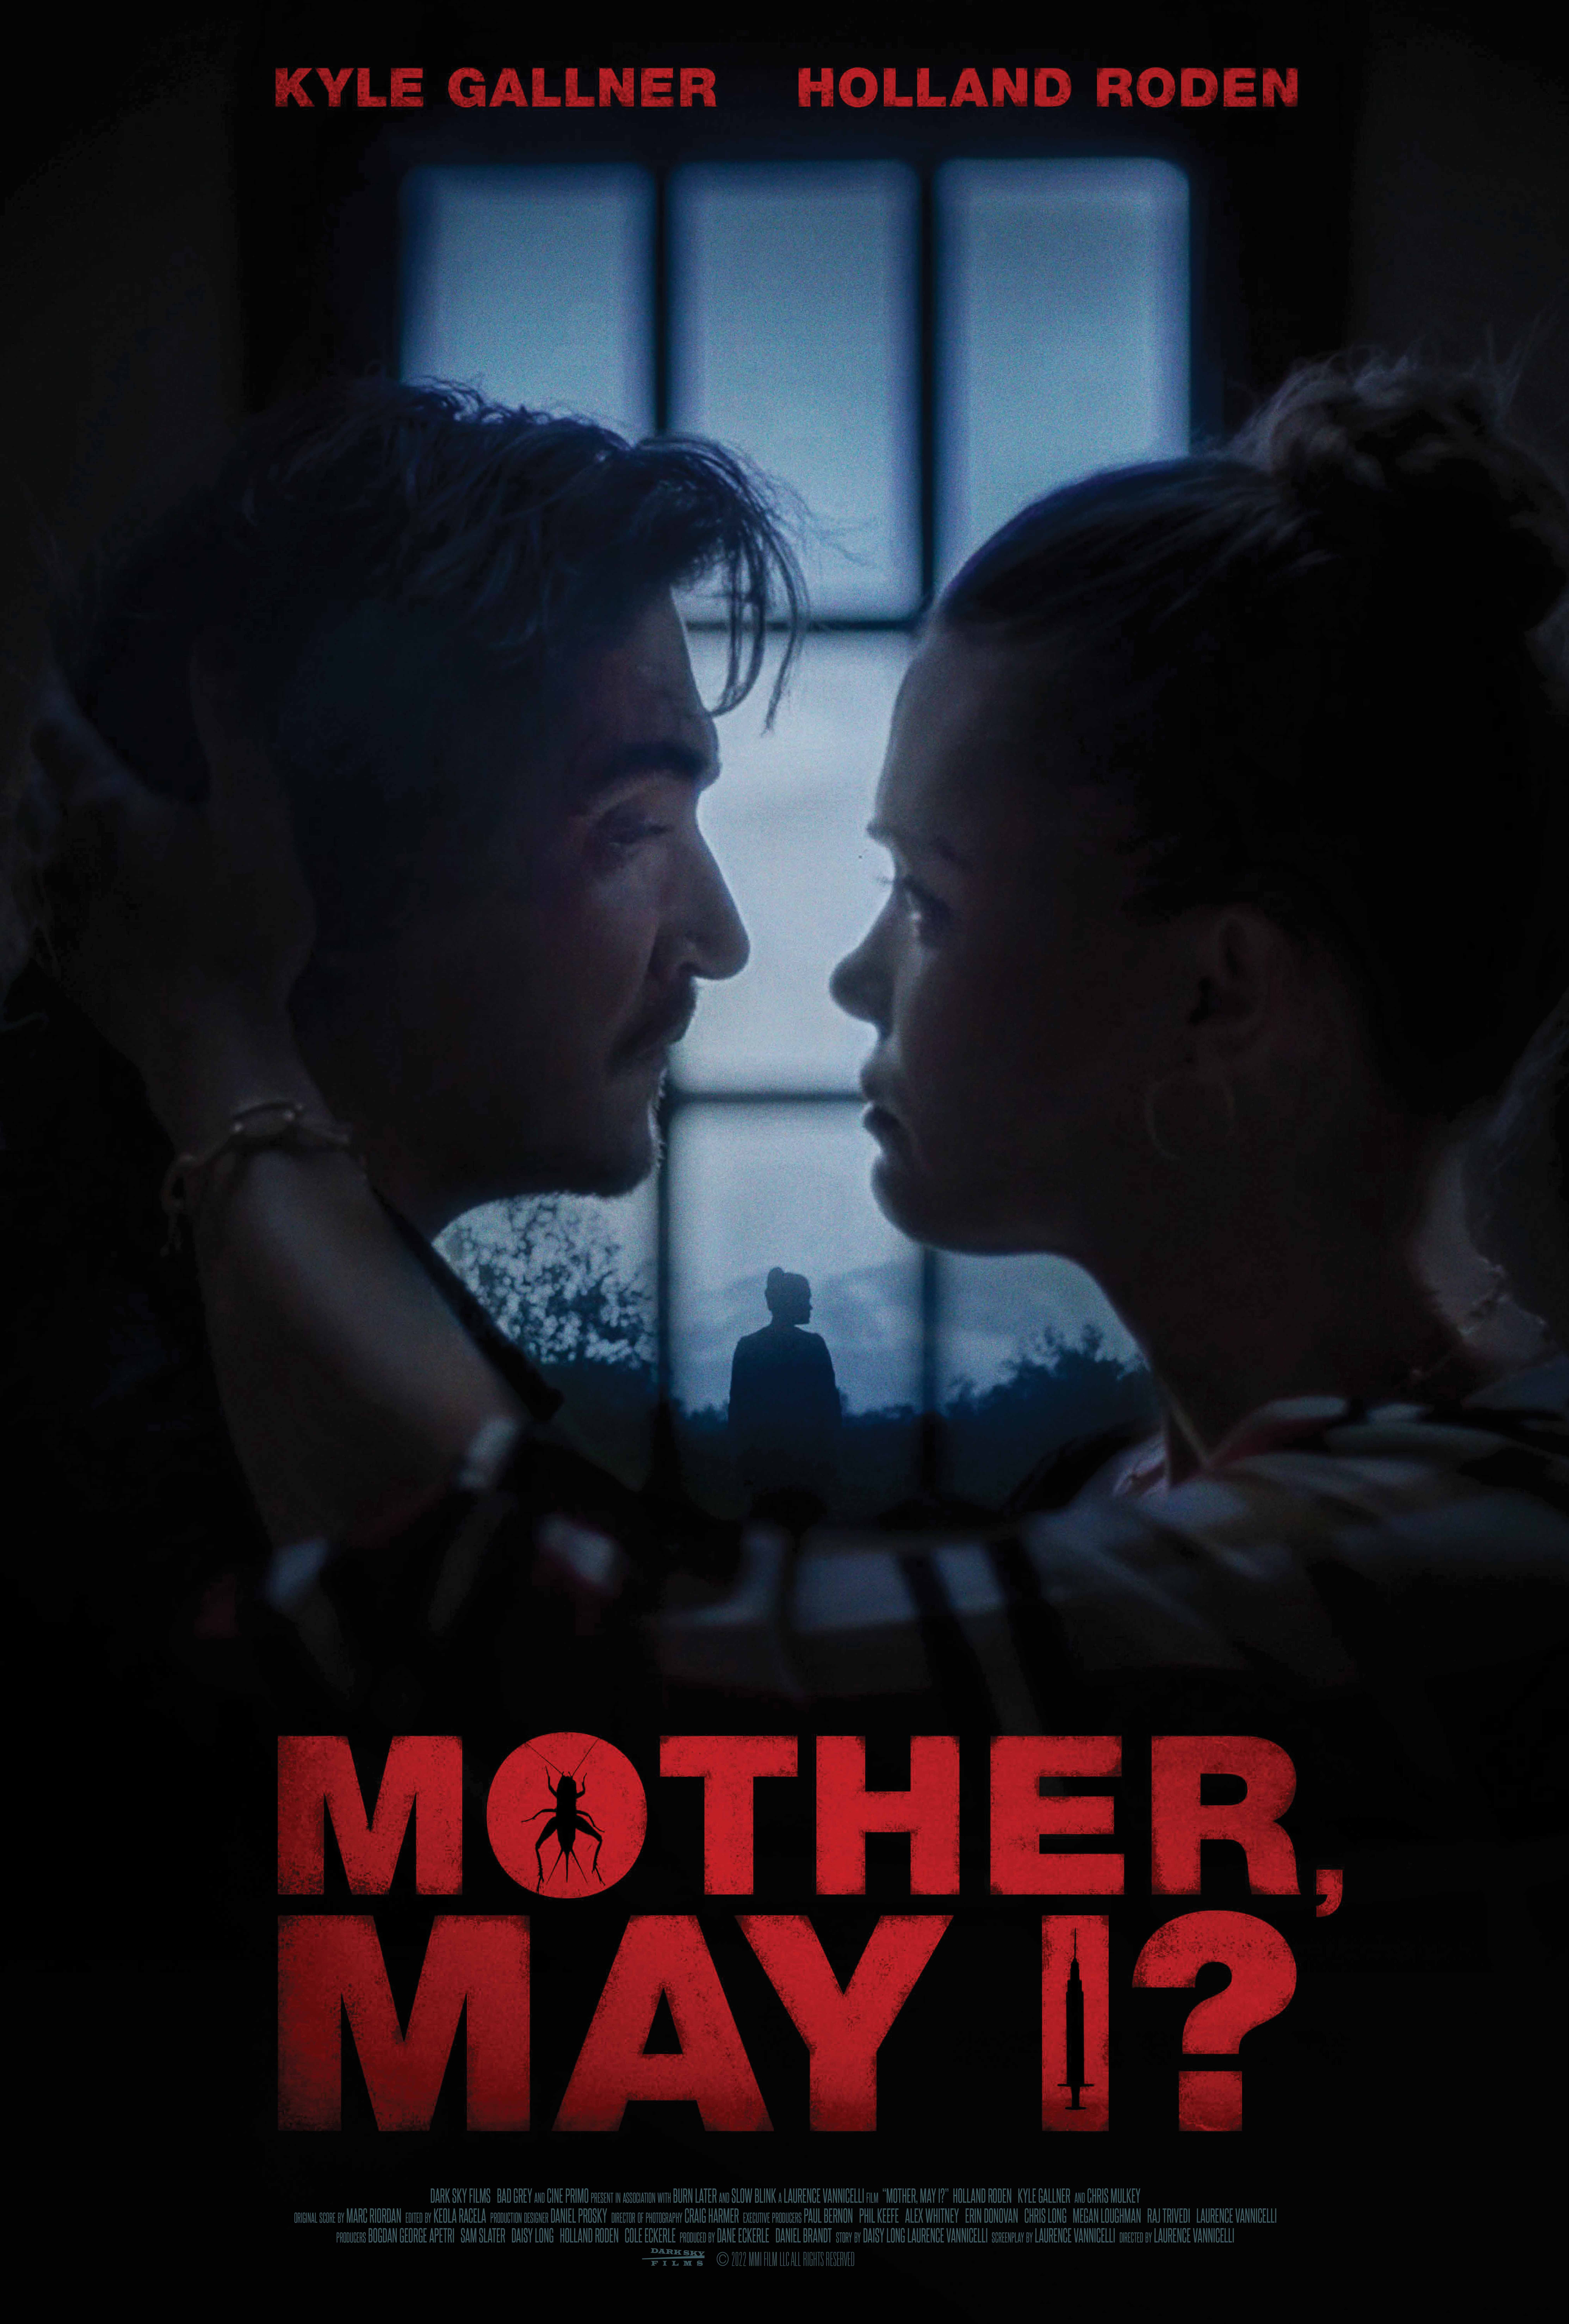 "Mother, May I?" - A Riveting Psychological Thriller Featuring Kyle Gallner and Holland Roden Set to Hit Theaters and VOD on July 21st 38